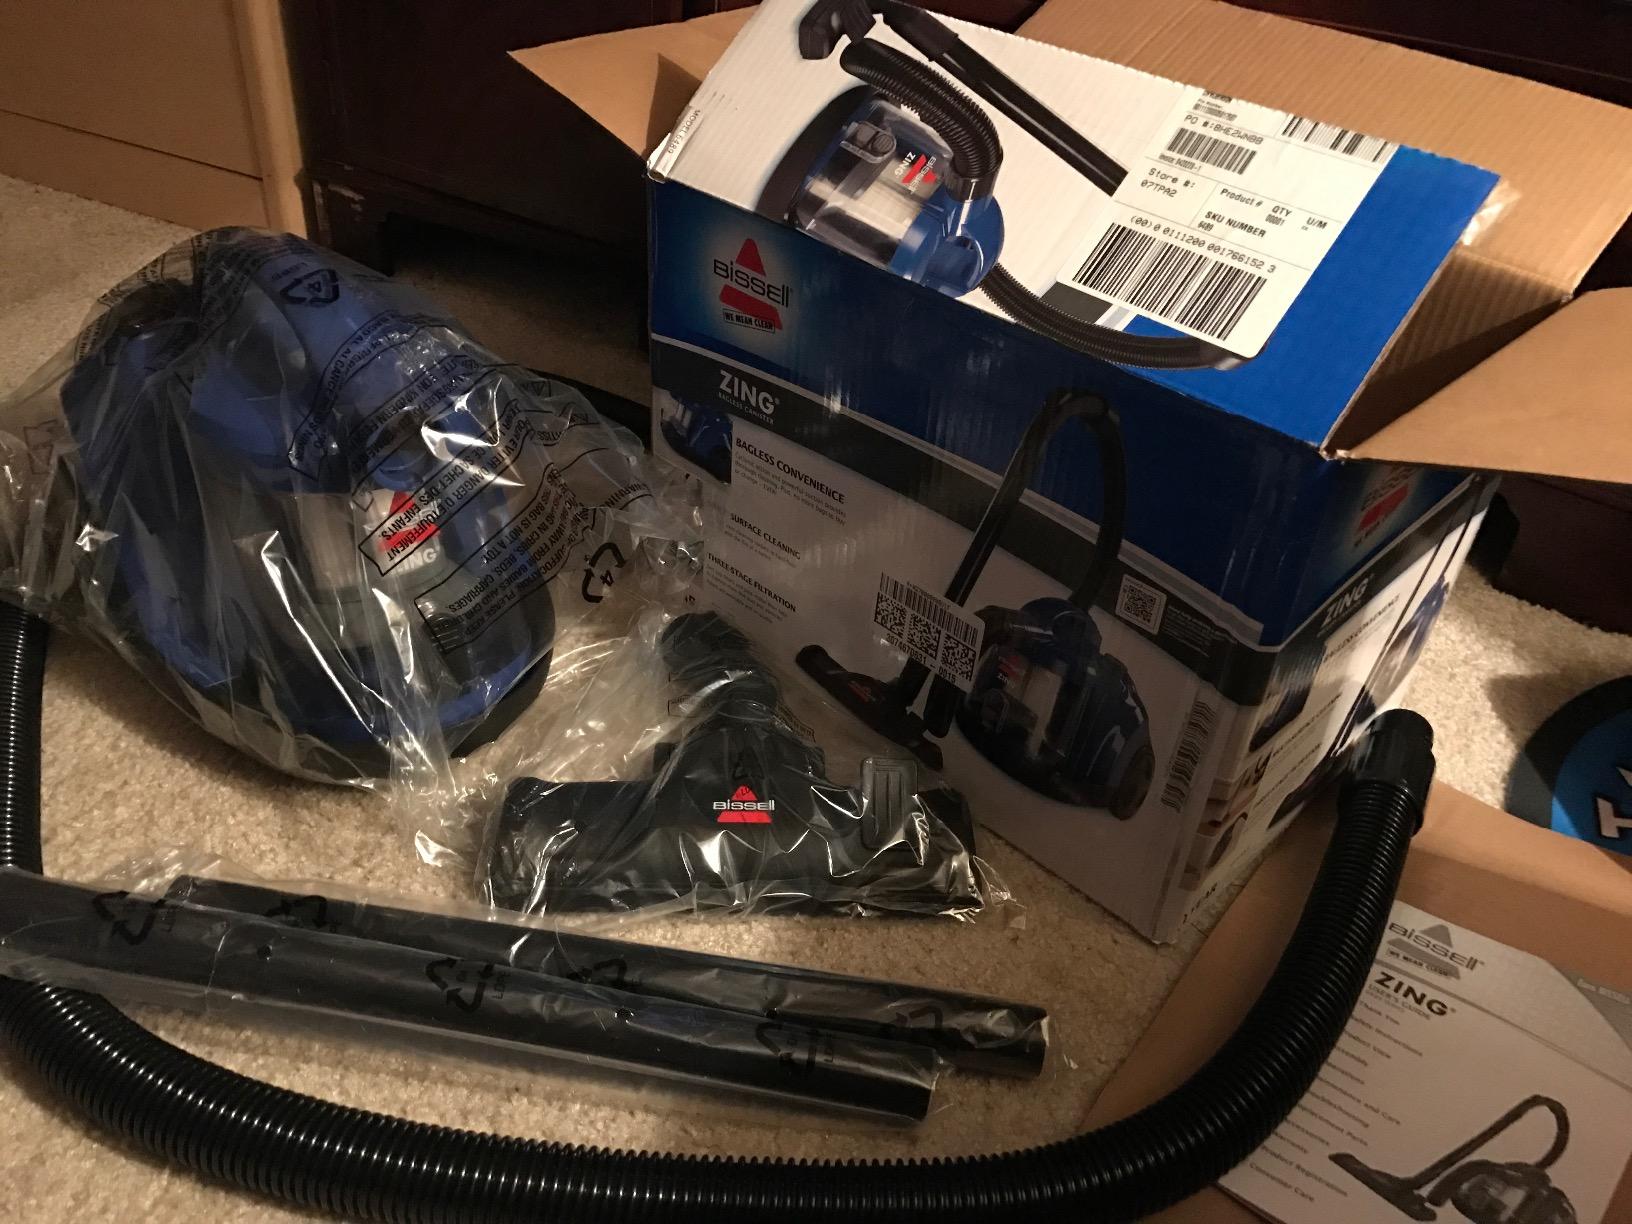 Bissell 6489 Zing Rewind Bagless Canister Vacuum what's in the box